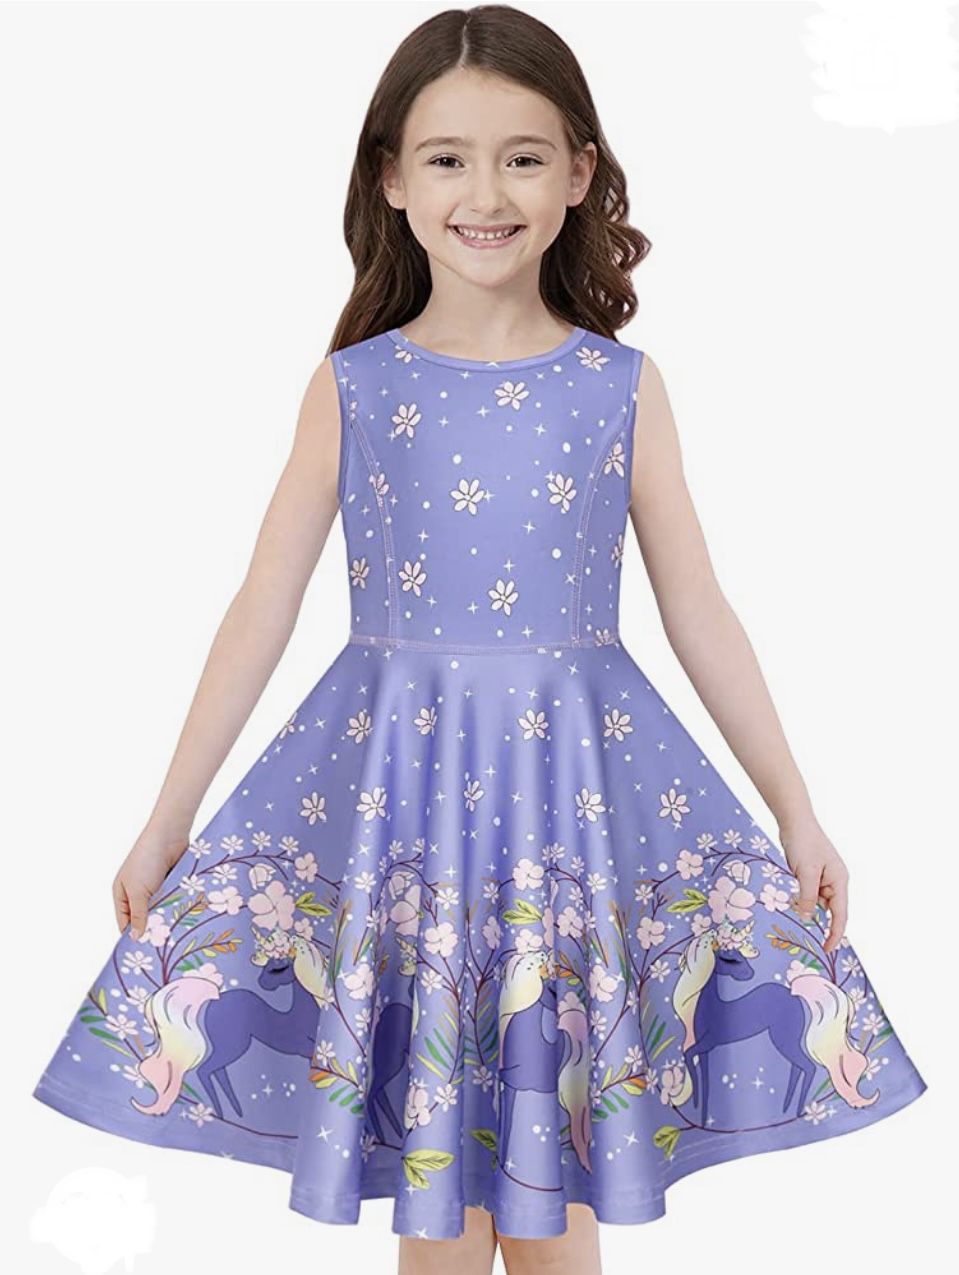 New Unicorn Dress For Girl Party Size:6-7.